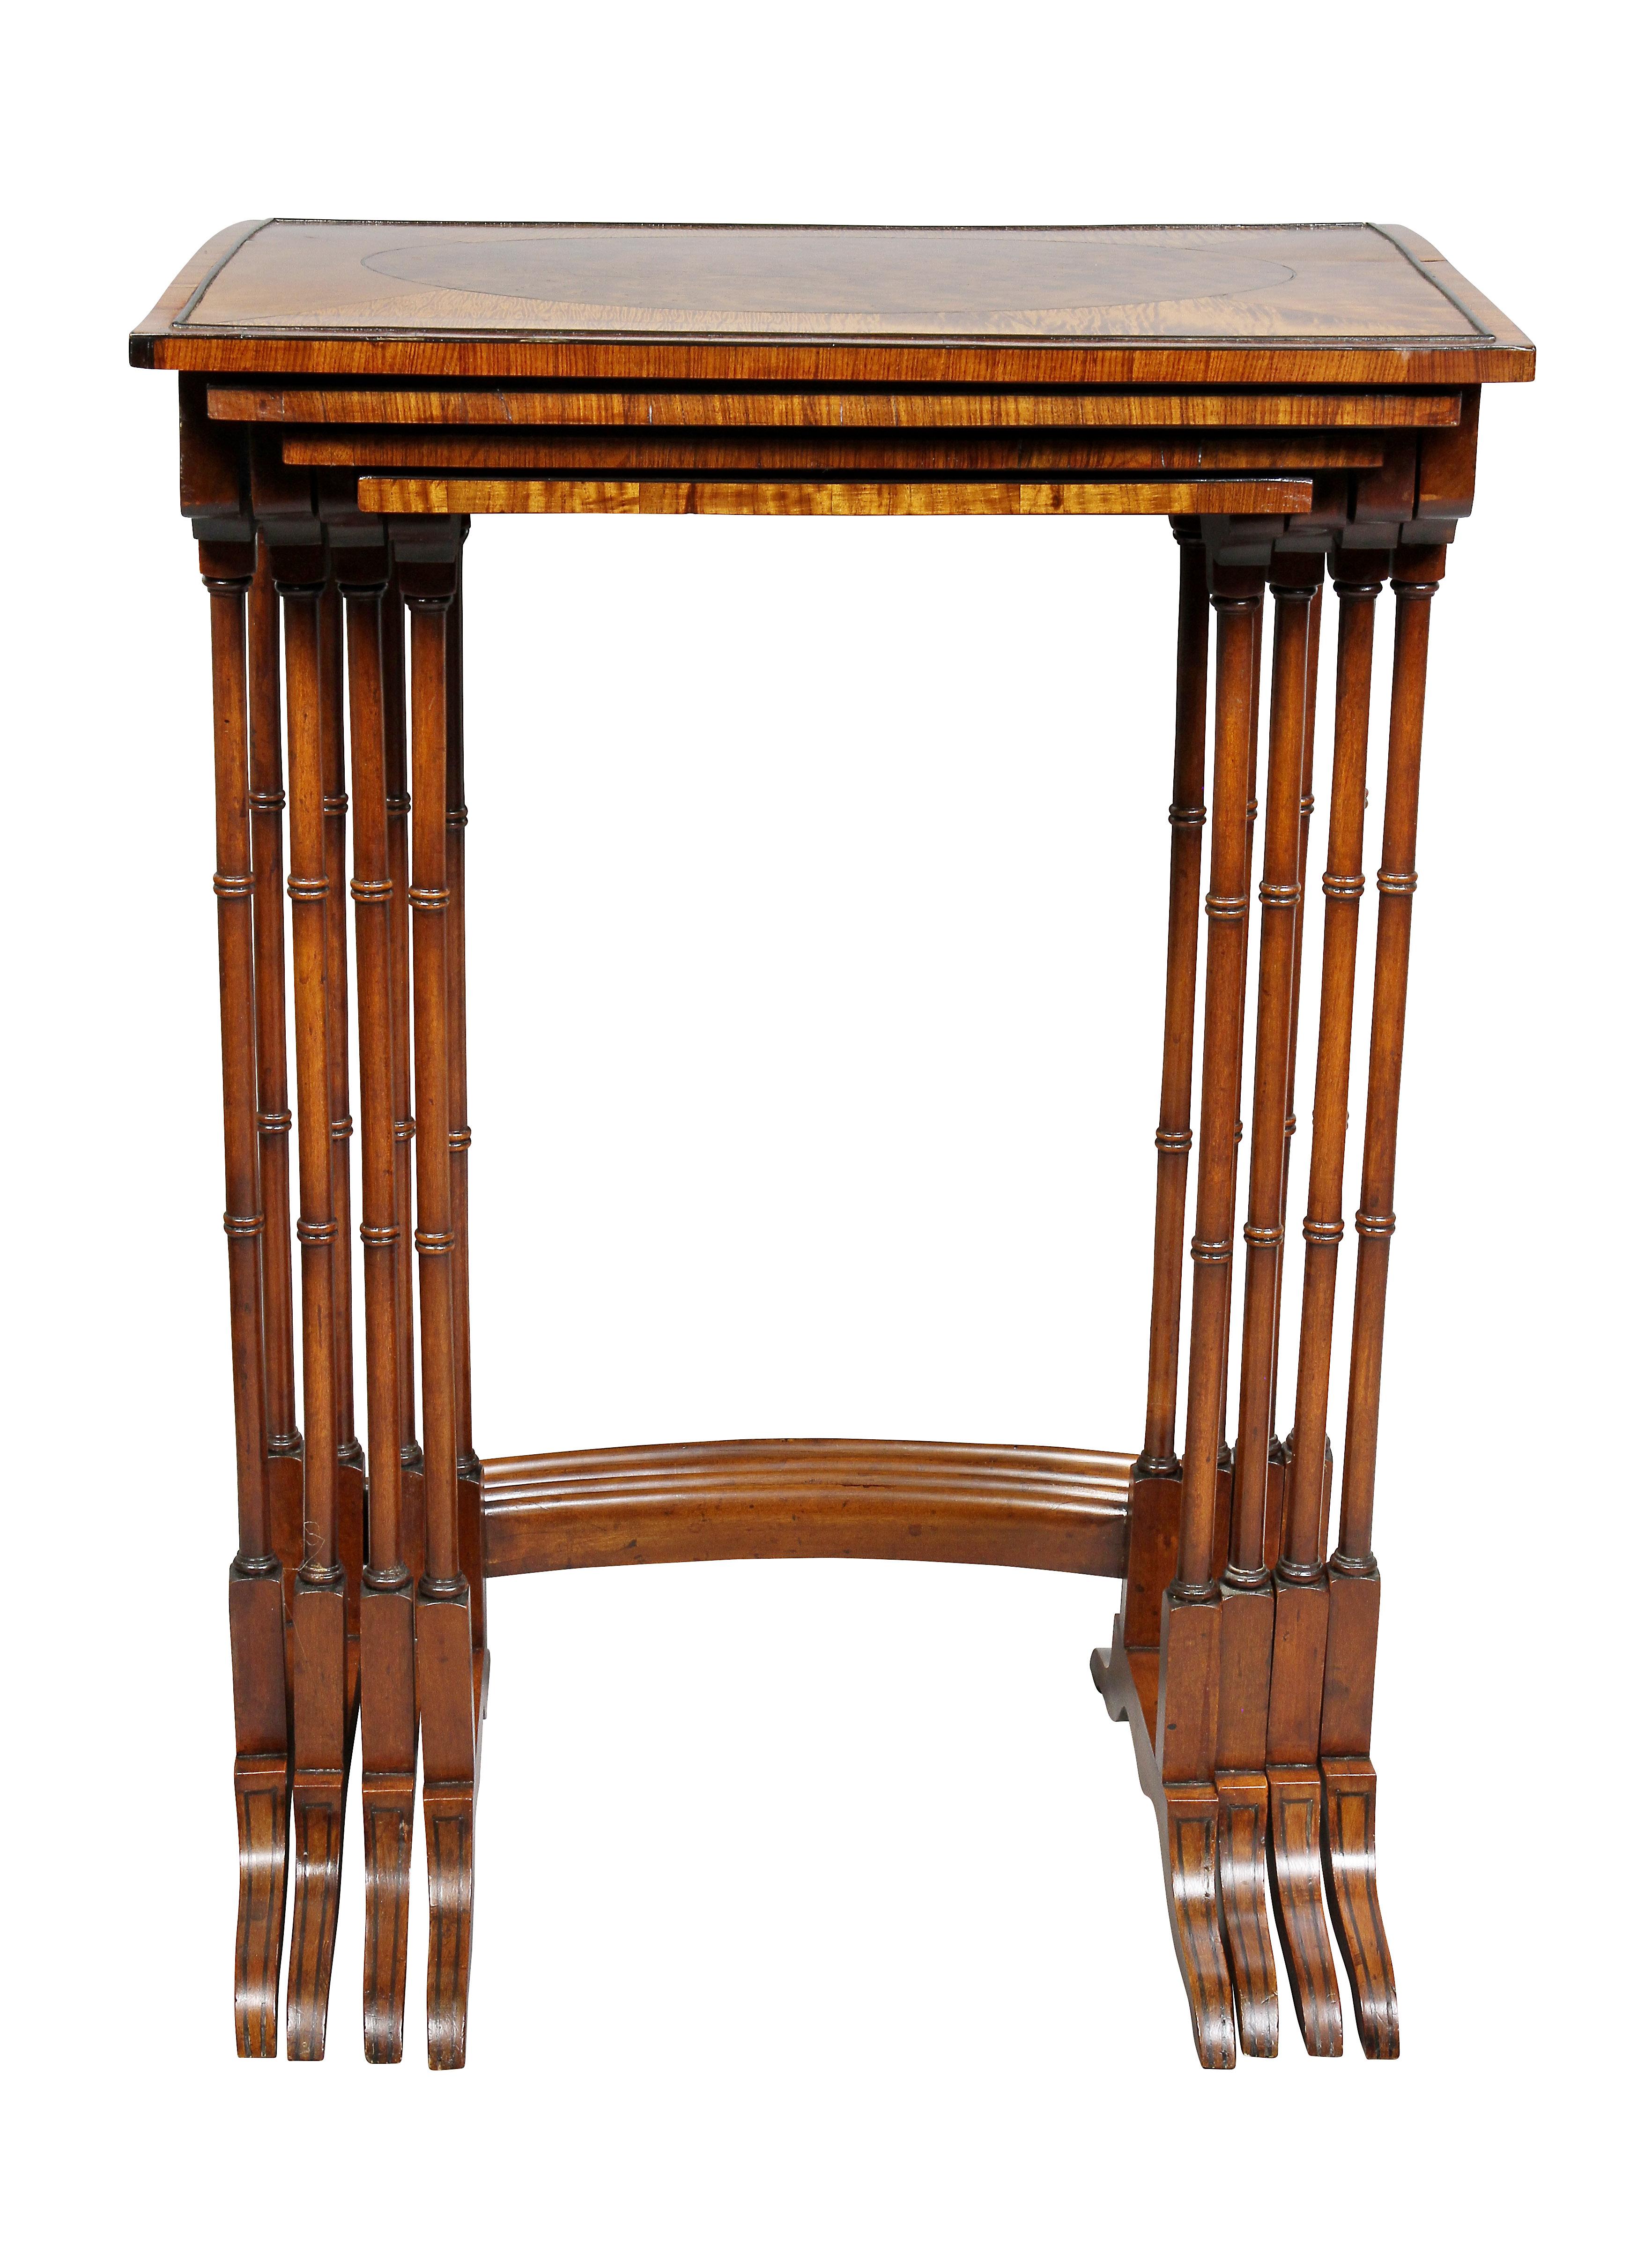 Each graduated table with a rectangular top with oval panel and satinwood border, bamboo turned legs, saber legs.